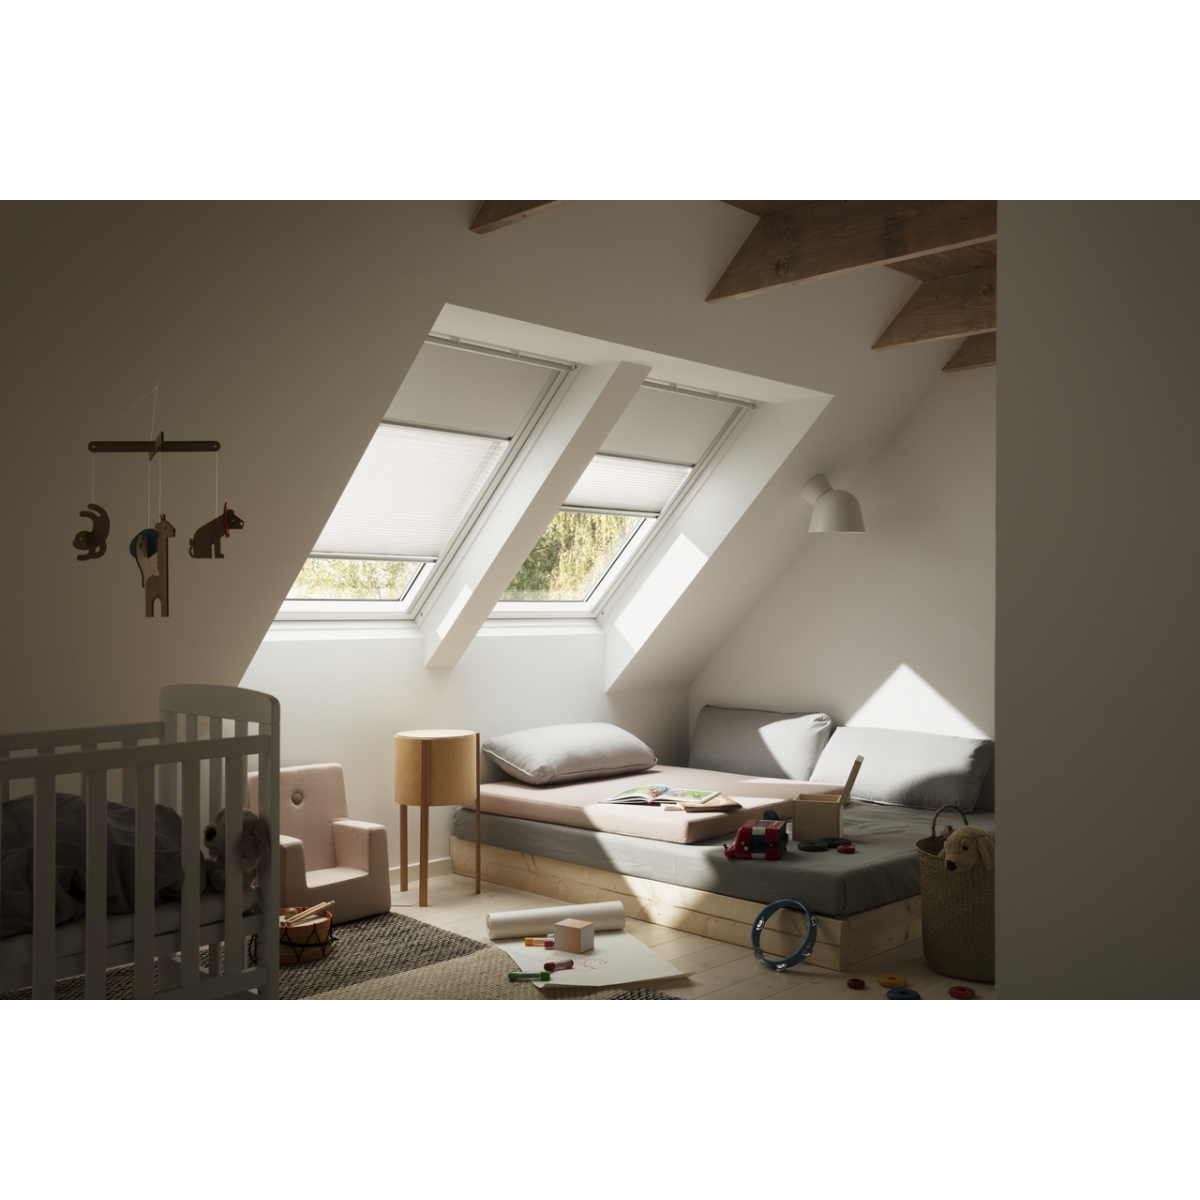 DUO Blackout Blind VELUX DUO Manual Blackout Blind DFD Navy Blue 1100 Standard